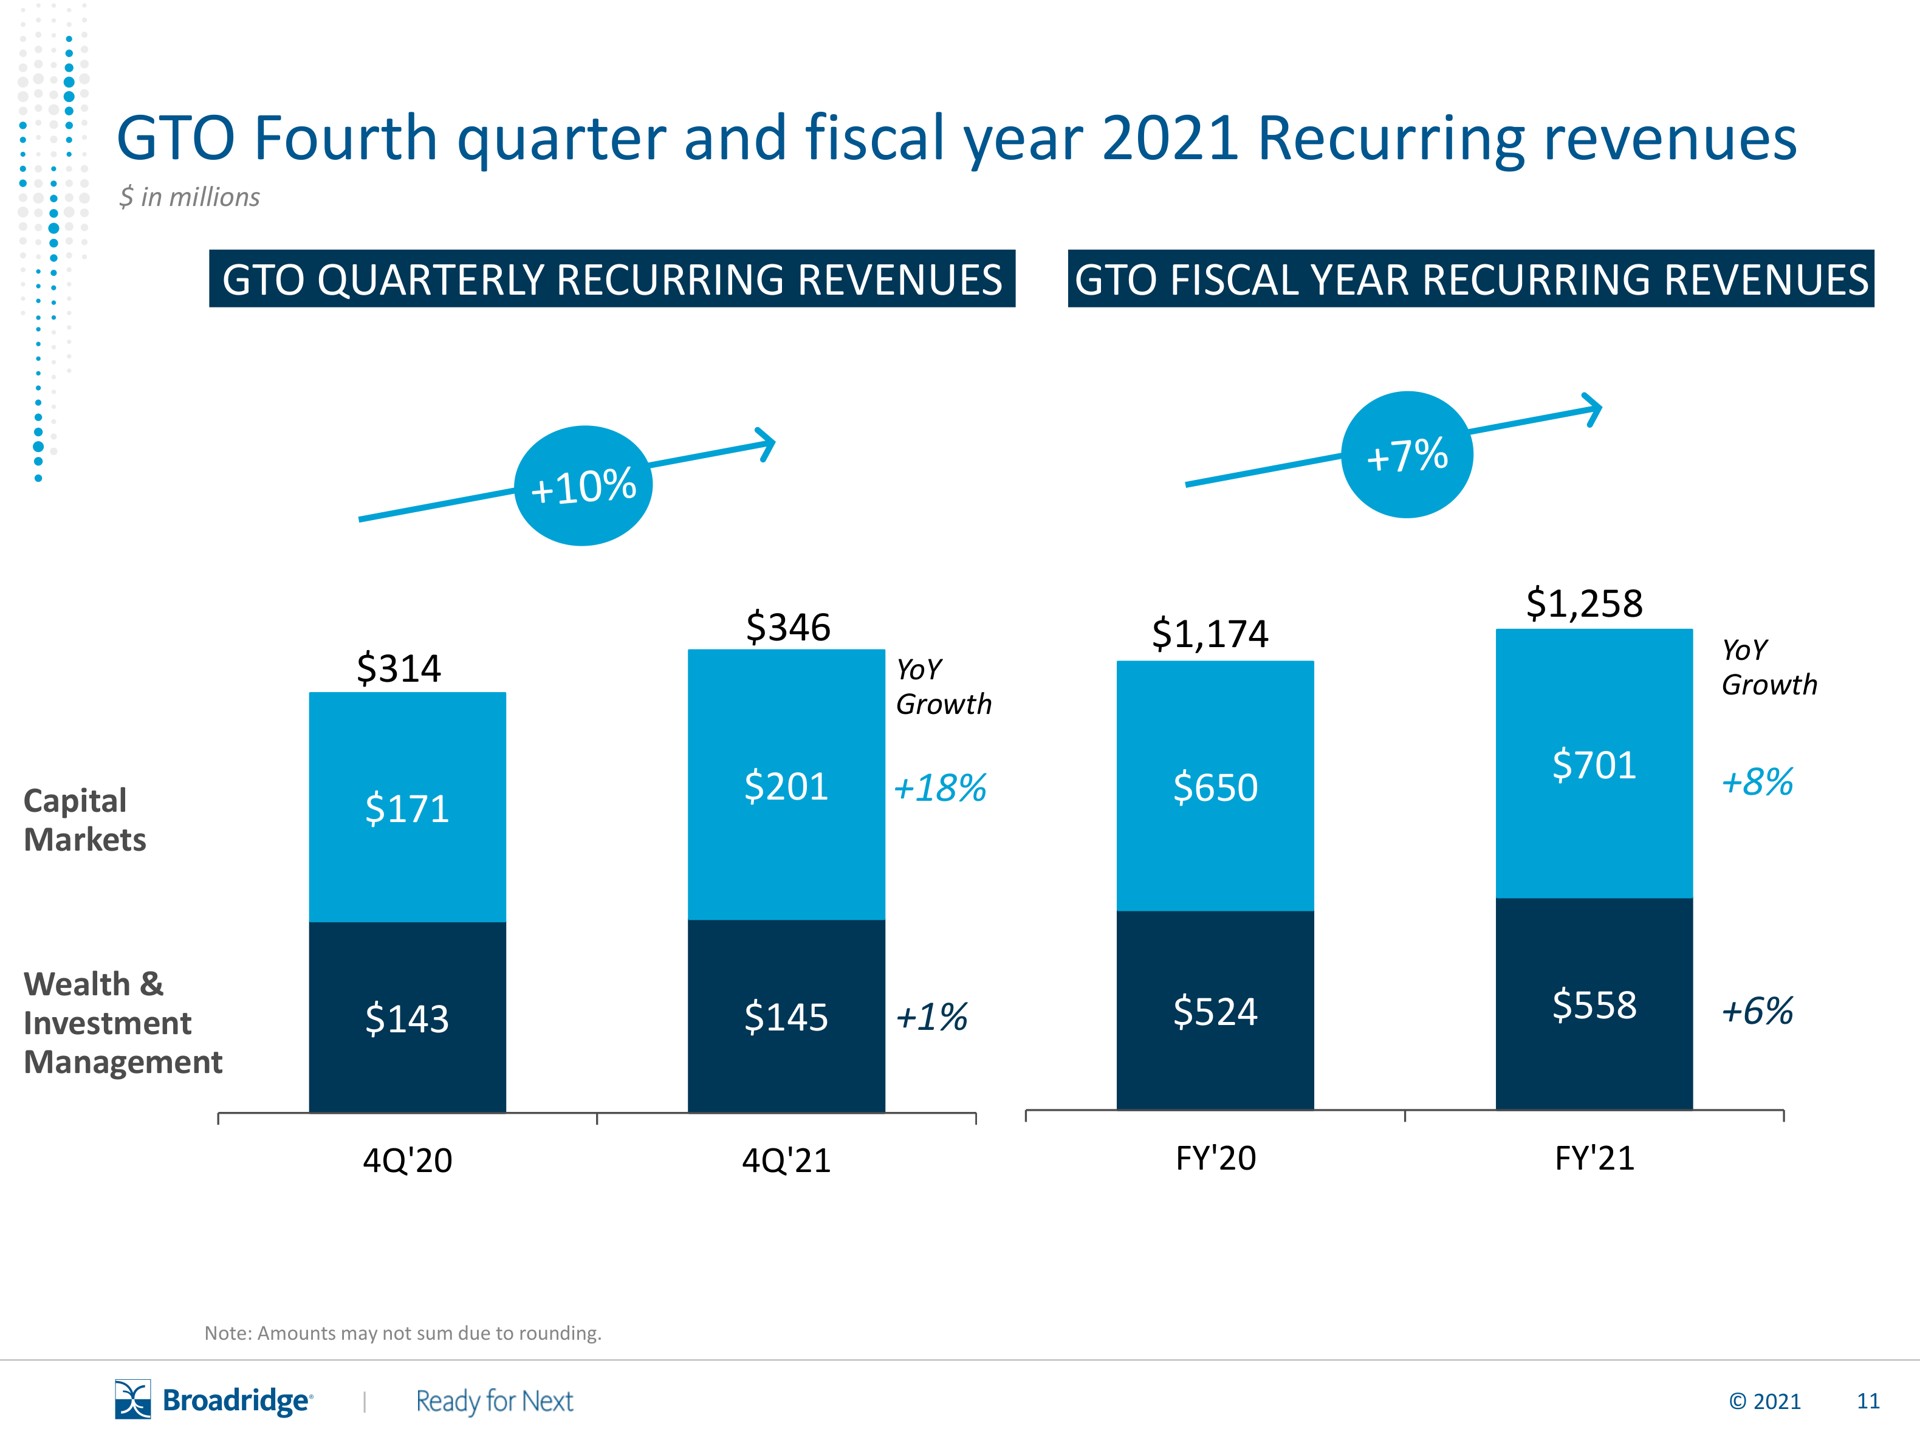 fourth quarter and fiscal year recurring revenues | Broadridge Financial Solutions